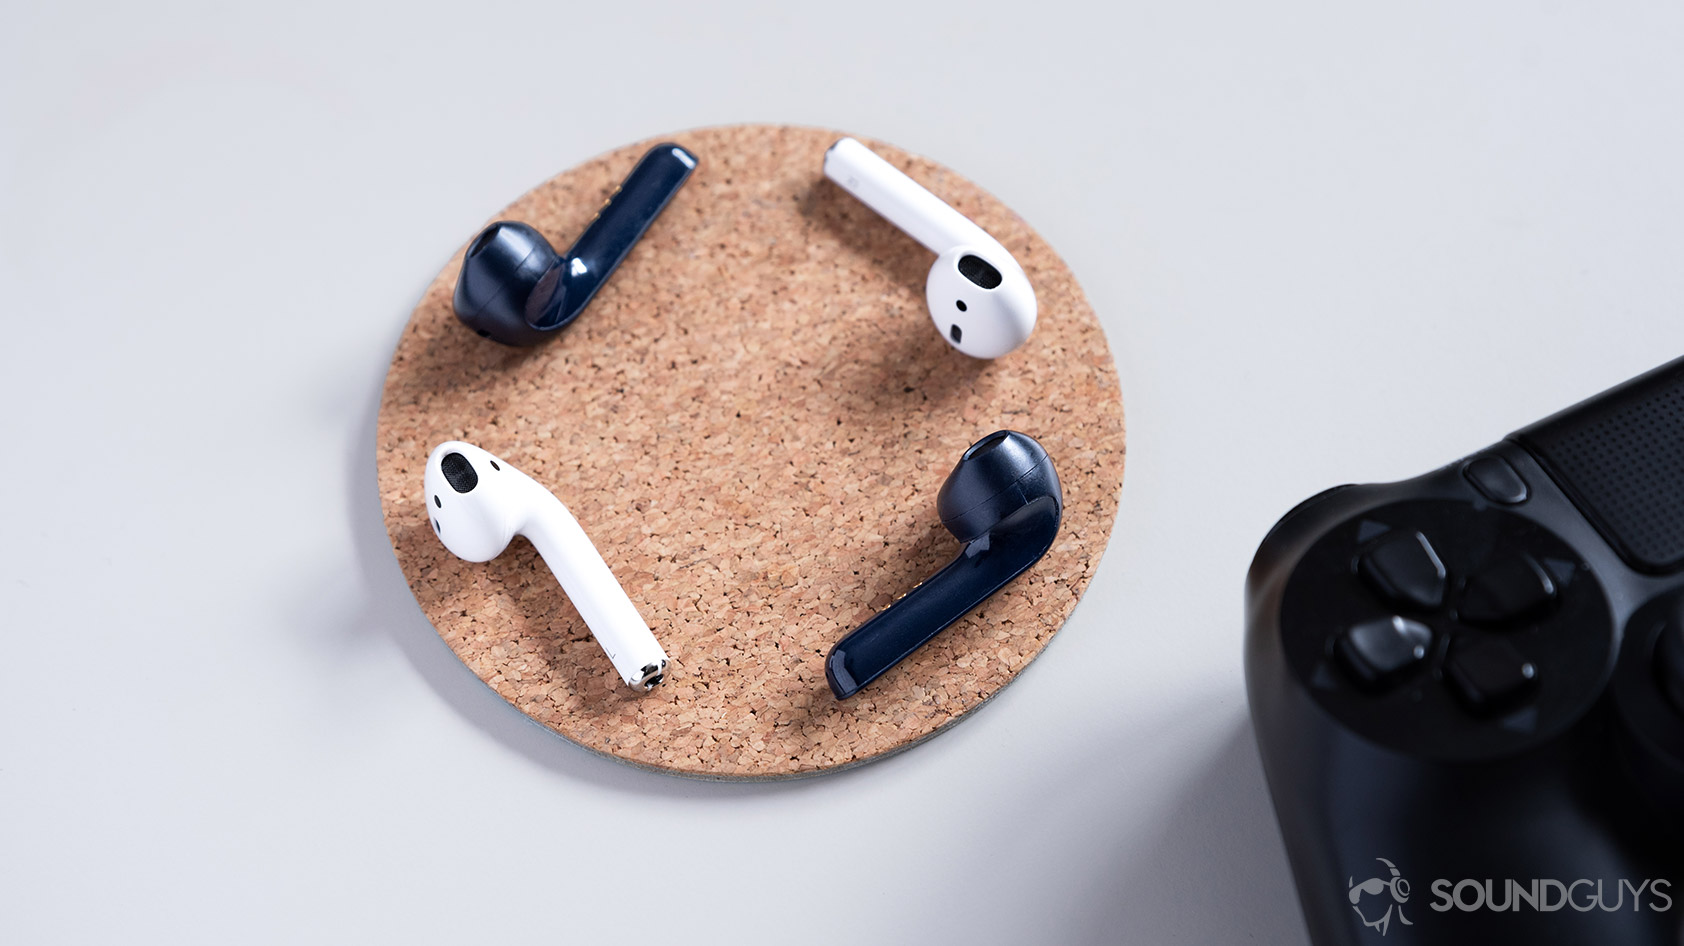 The Mobvoi TicPods 2 Pro true wireless earbuds compared to the Apple AirPods on a cork coaster.